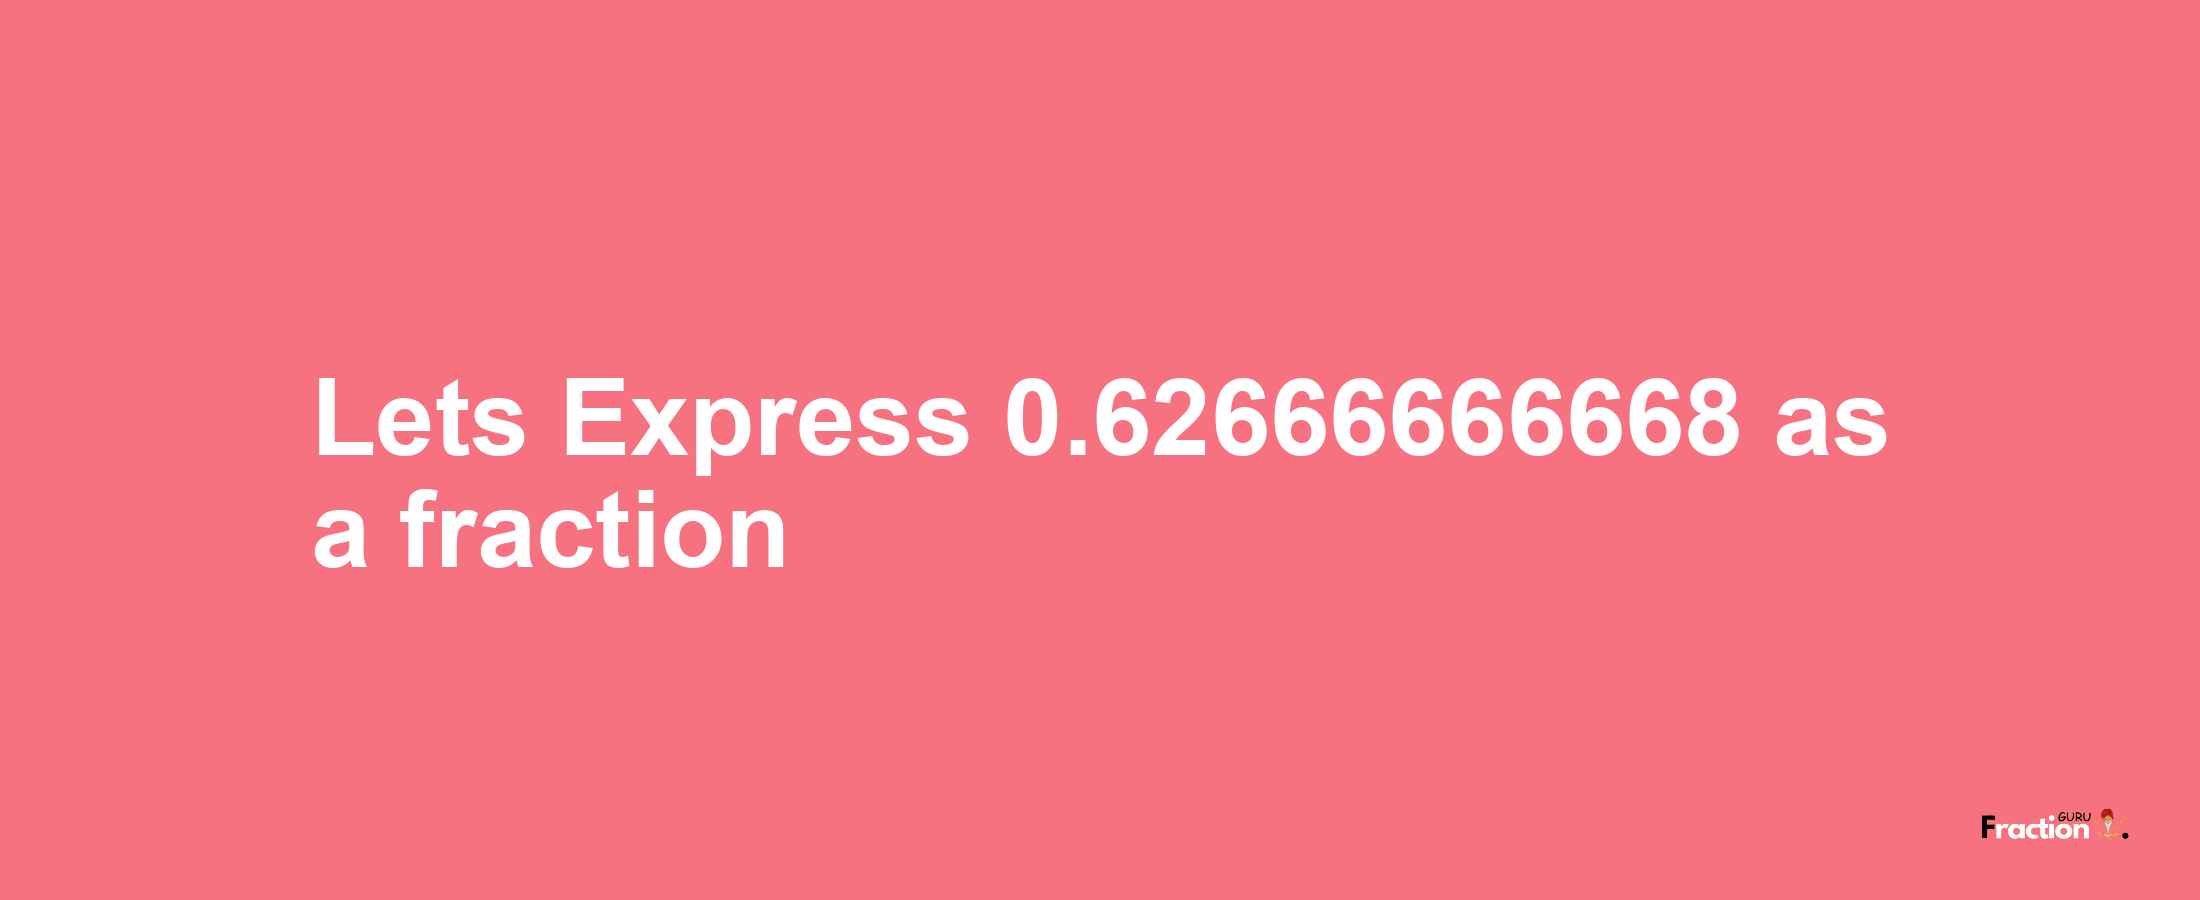 Lets Express 0.62666666668 as afraction